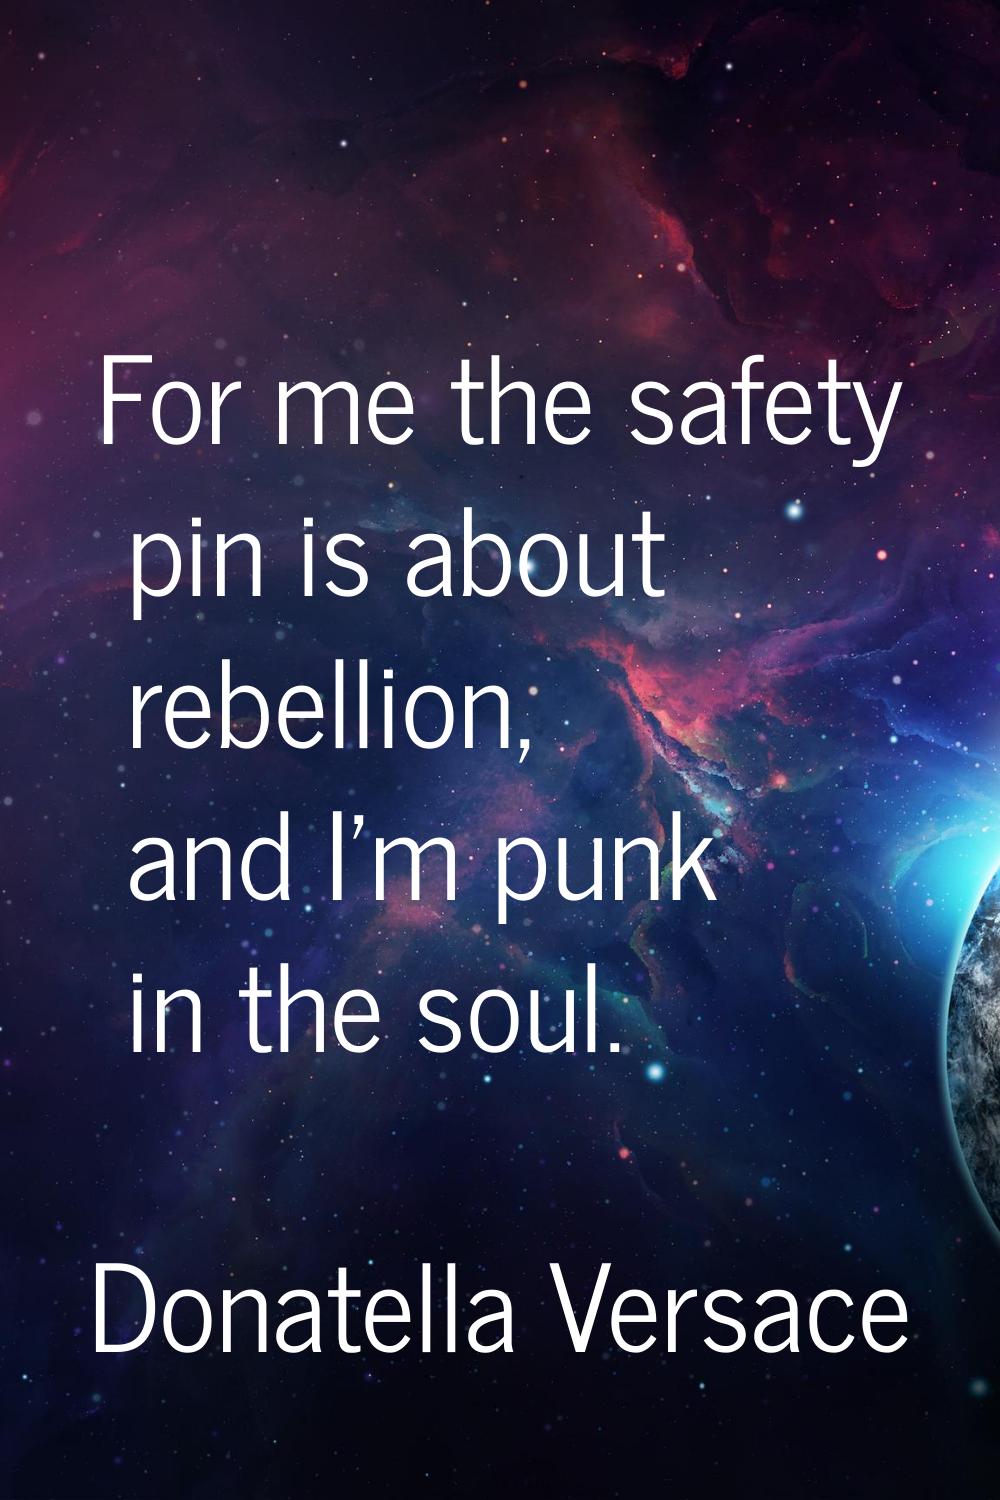 For me the safety pin is about rebellion, and I'm punk in the soul.